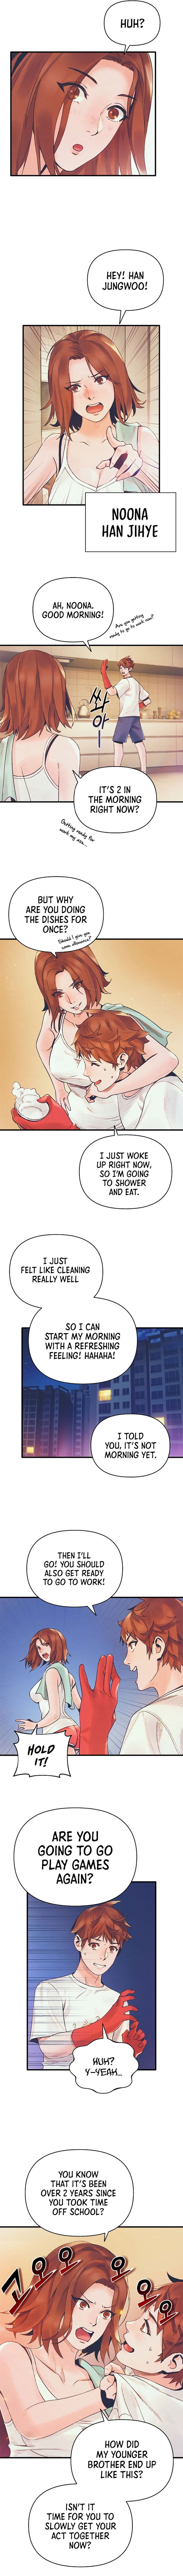 the-healing-priest-of-the-sun-chap-4-4